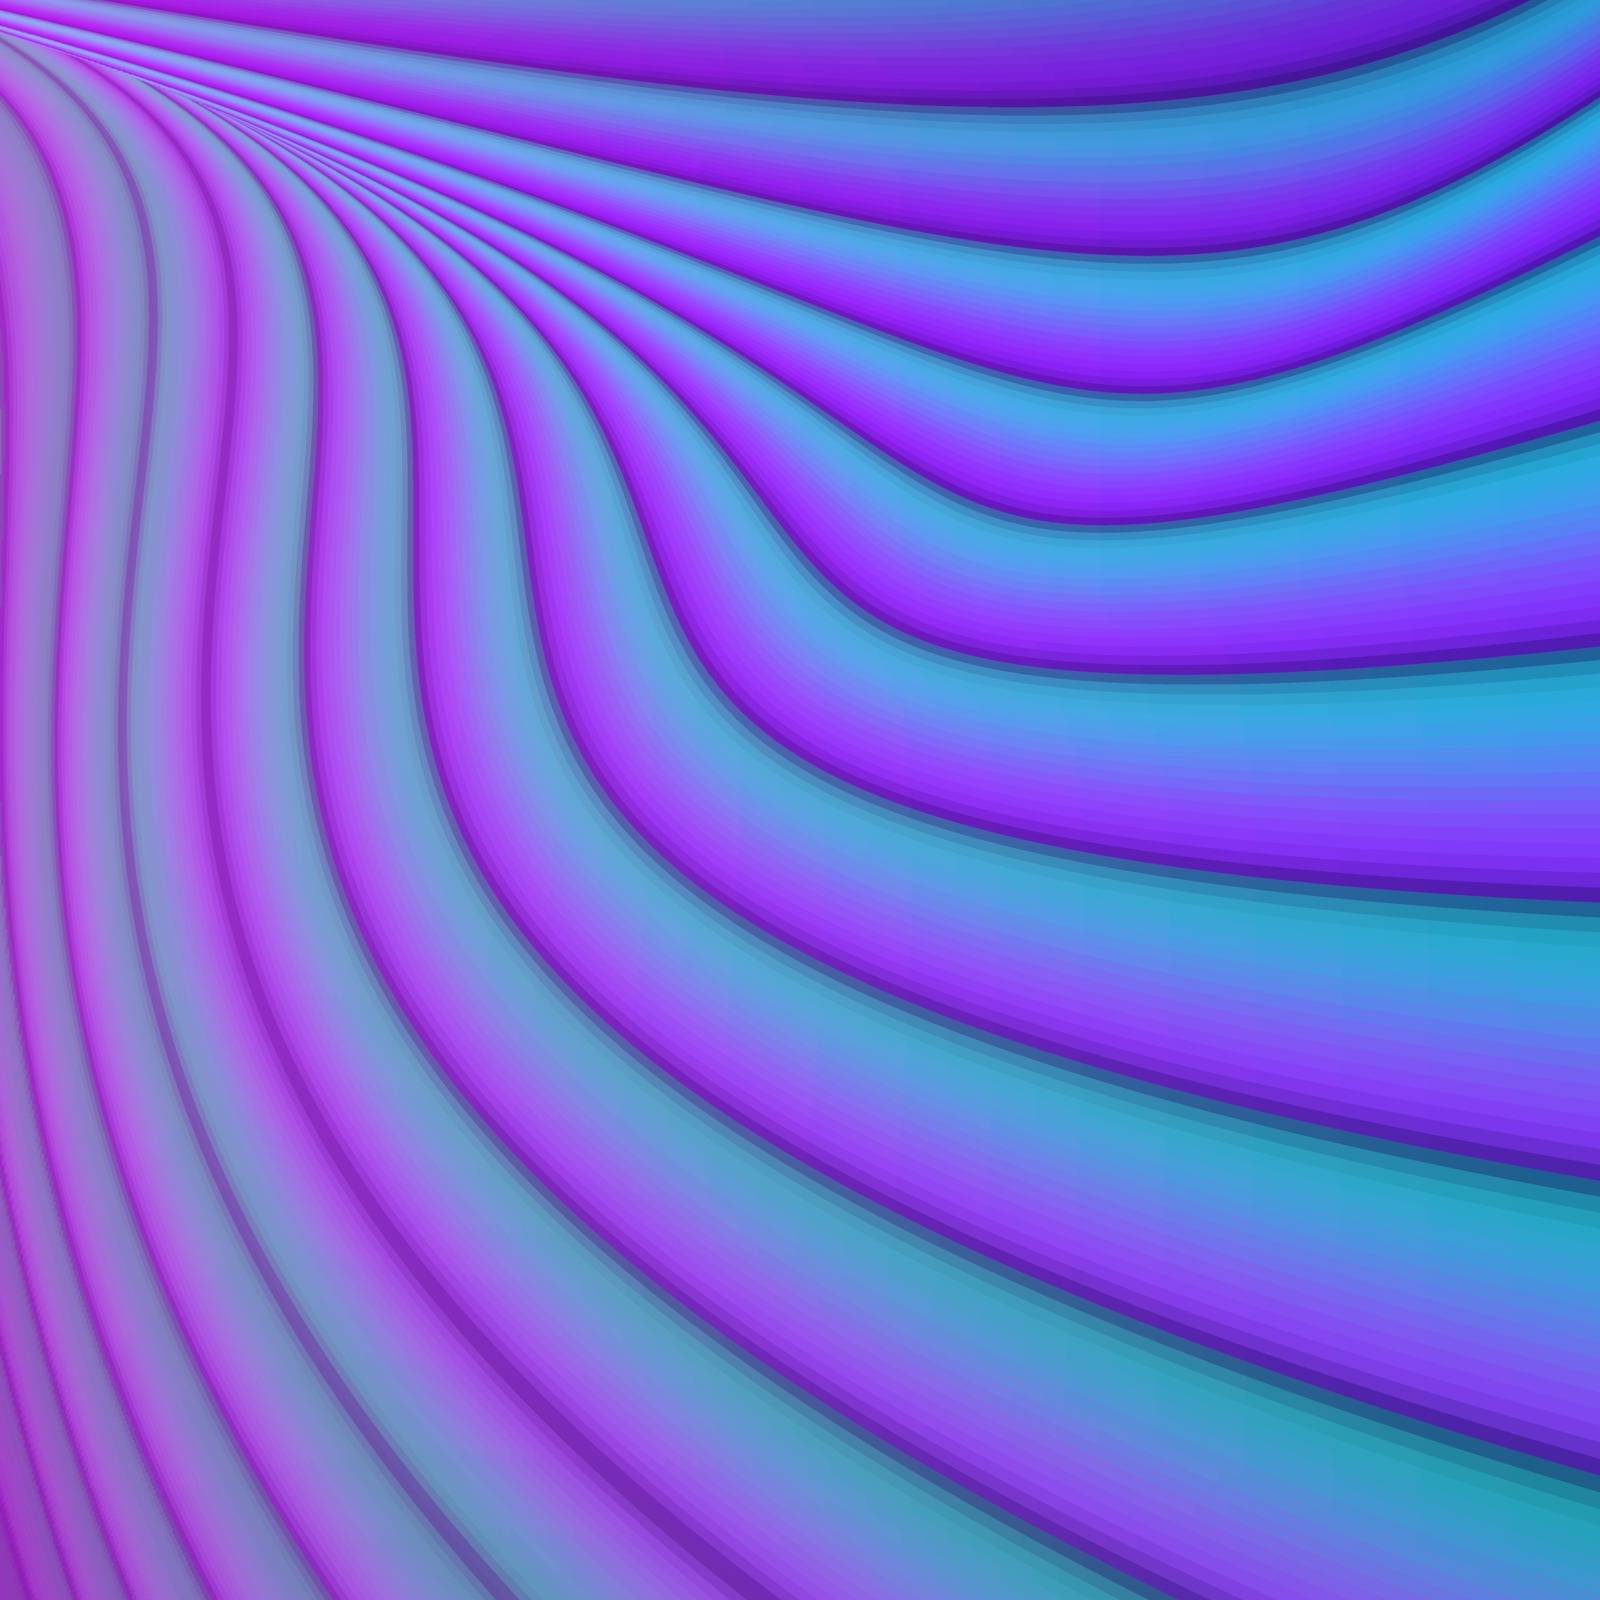 Blue and purple colored abstract lines texture background.